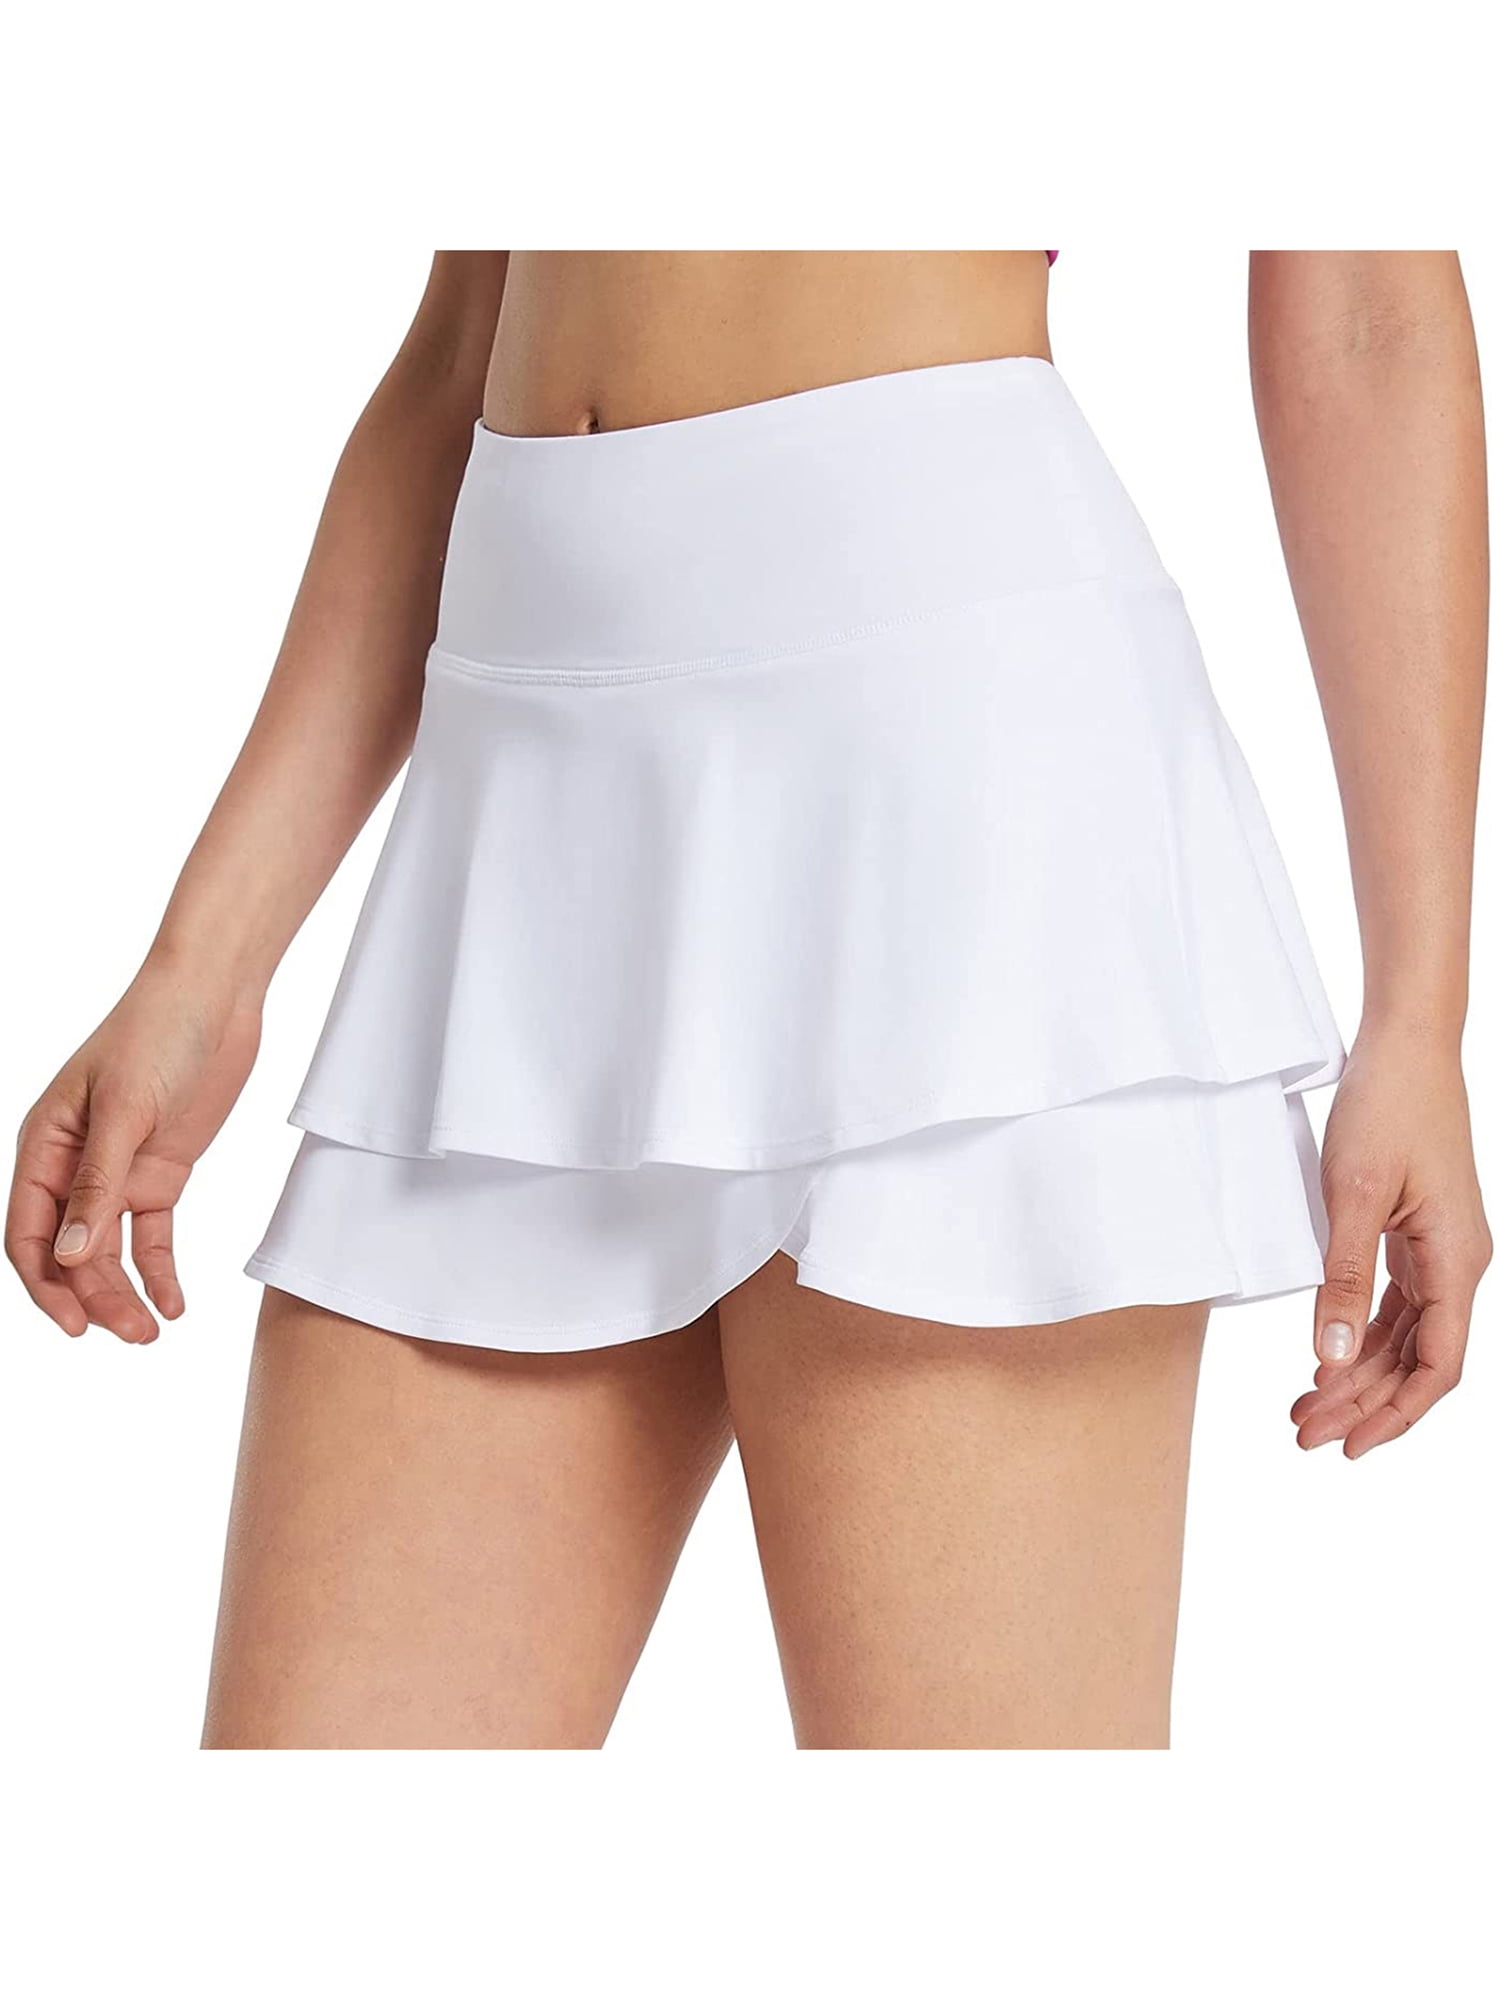 Women's Active Skort Athletic Ruffle Pleated Tennis Skirt with Pocket for Running  Golf Workout - Walmart.com